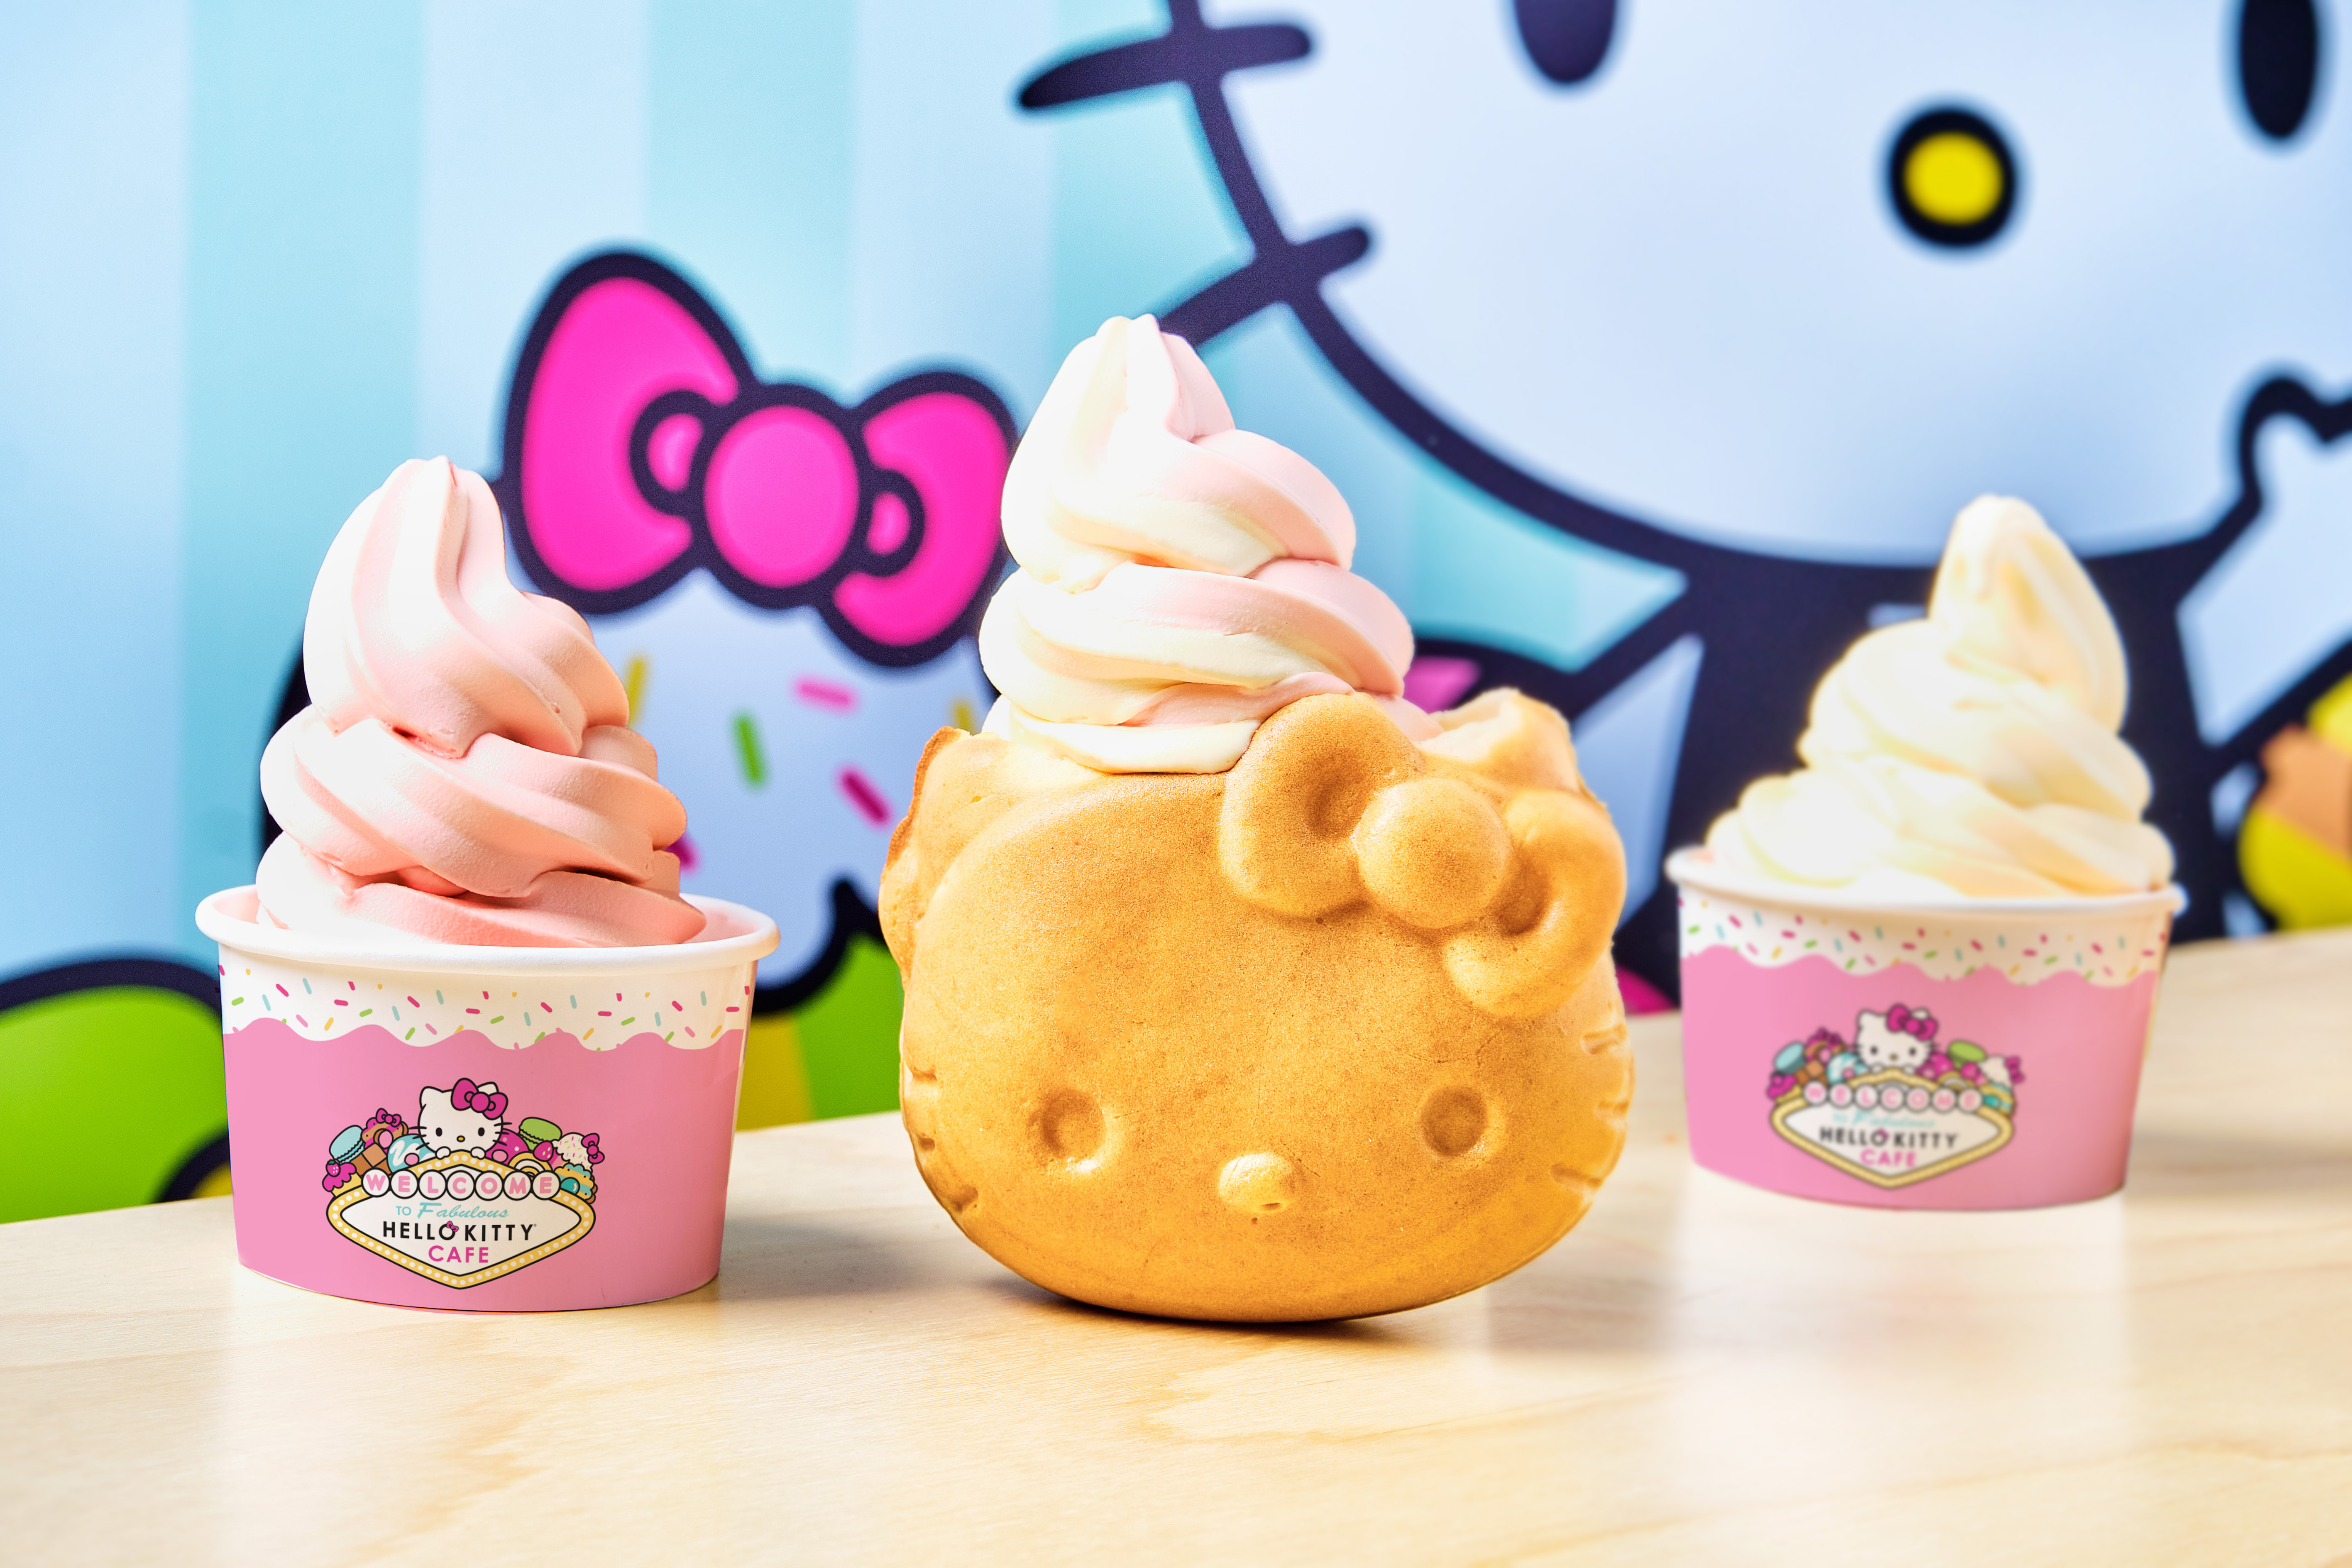 Hello Kitty Cafe - Introducing a new way to stay stylish and